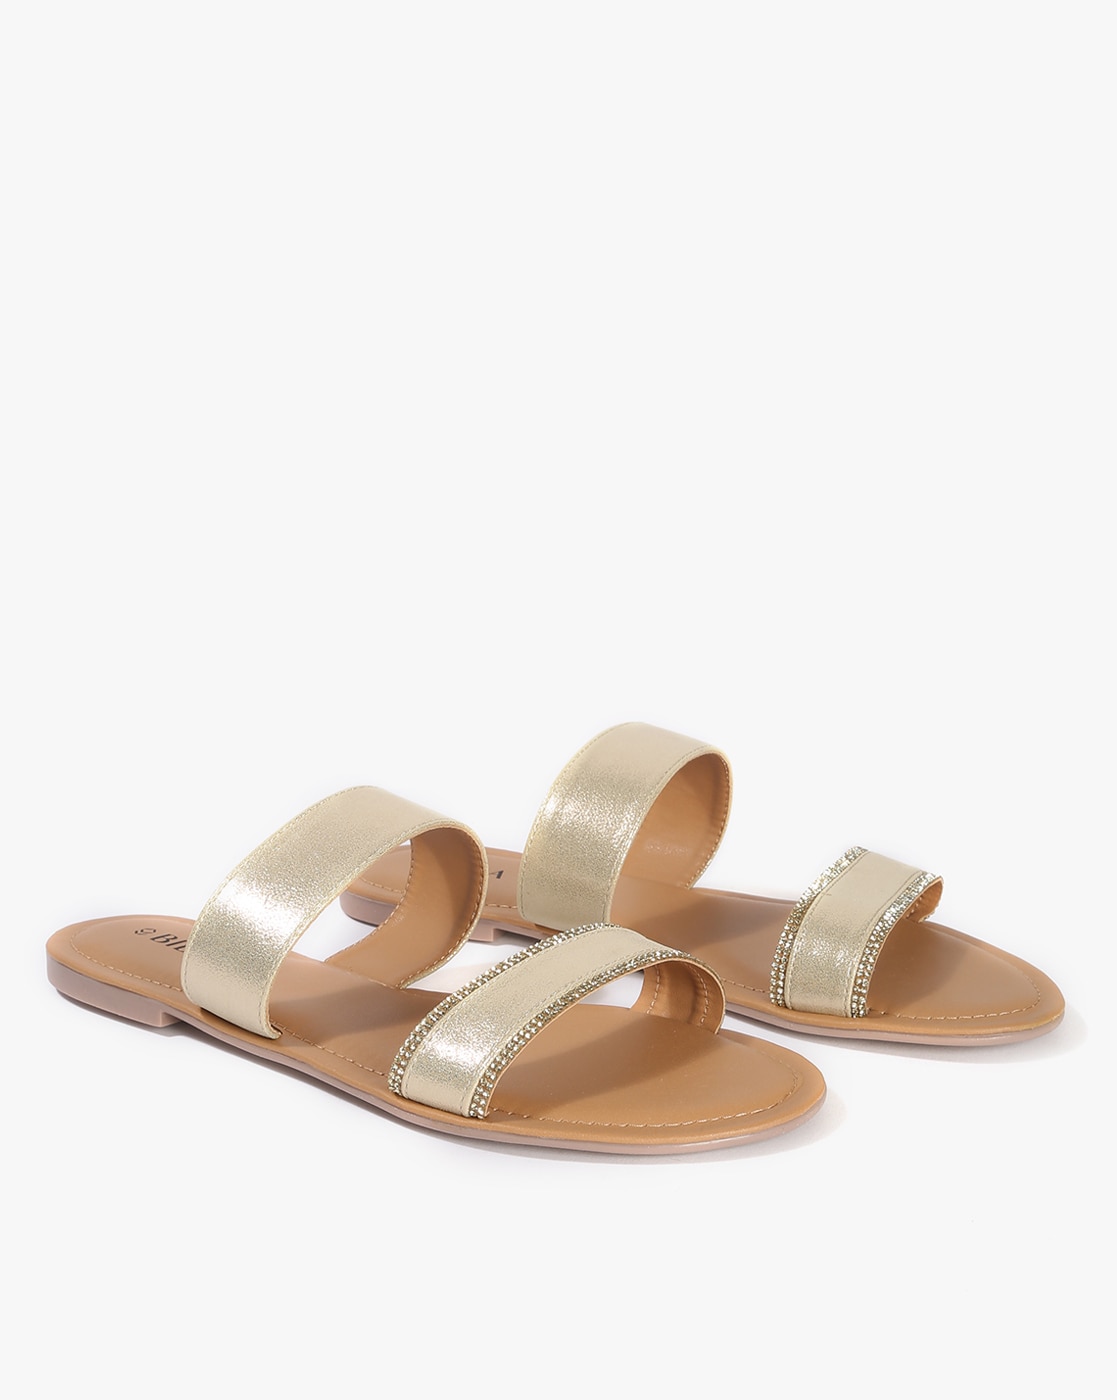 Black Dove Double-Strap Sandals - CHARLES & KEITH US